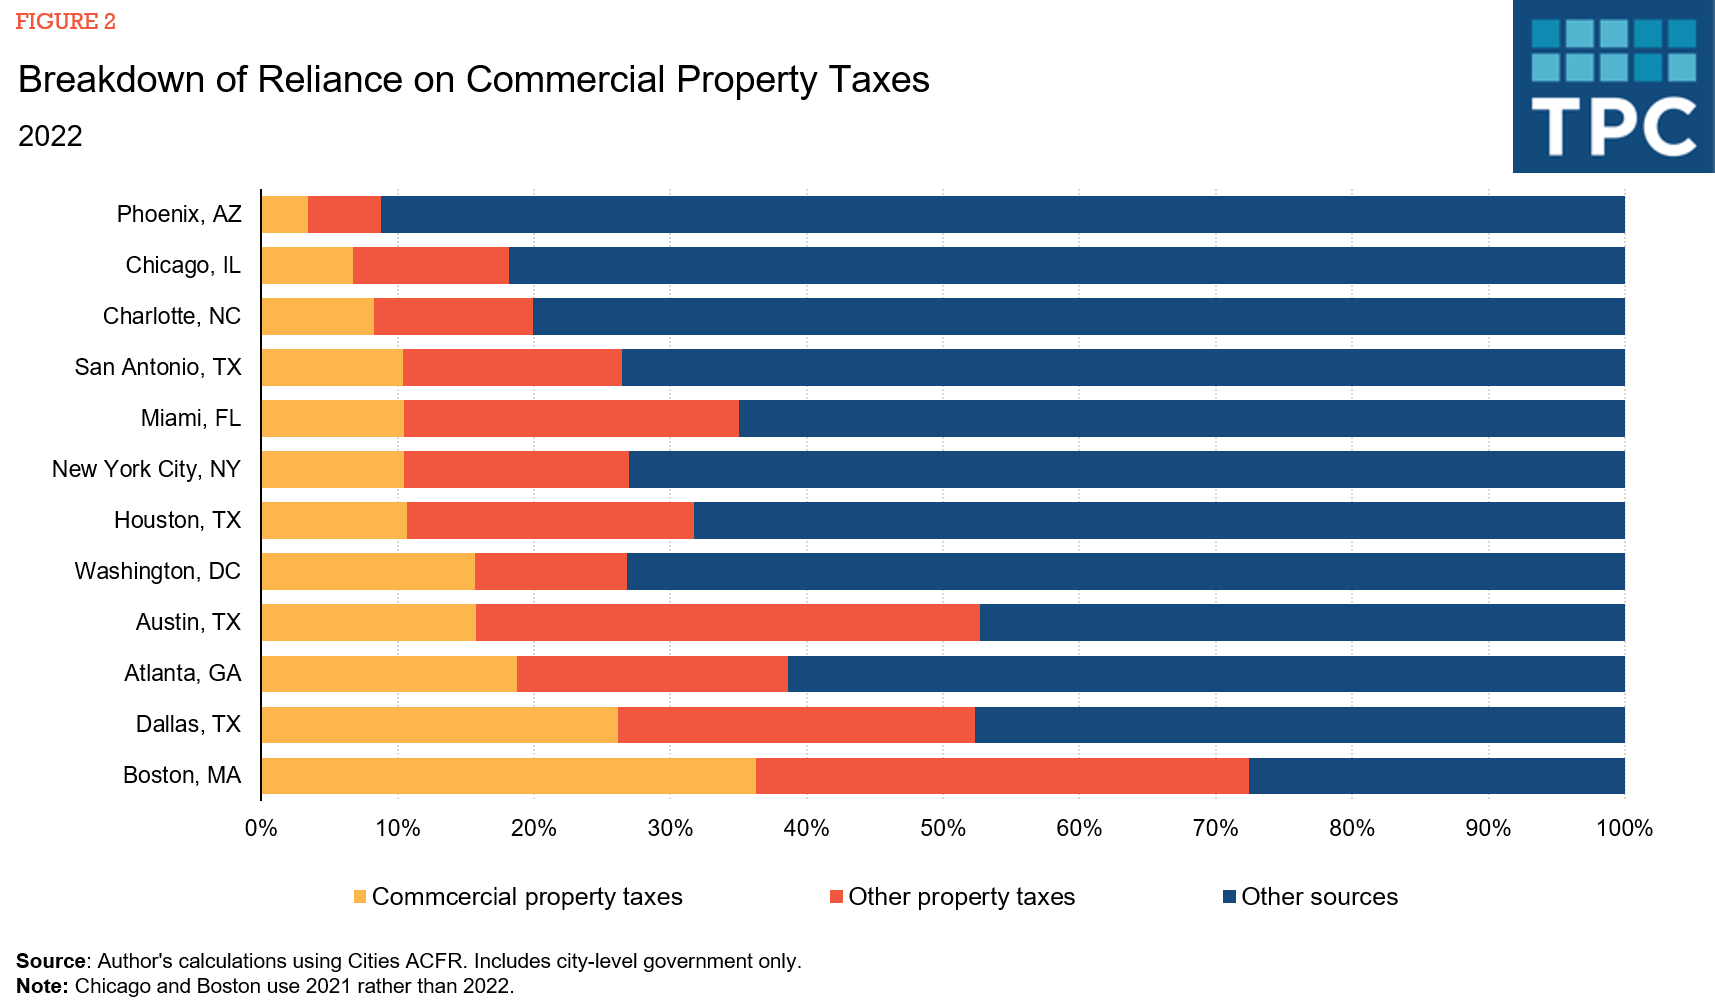 chart showing how much major cities depend on commercial property taxes in their budget. Phoenix relies the least on commercial property taxes (10%) while Boston has the highest reliance on commercial property (nearly 40%)